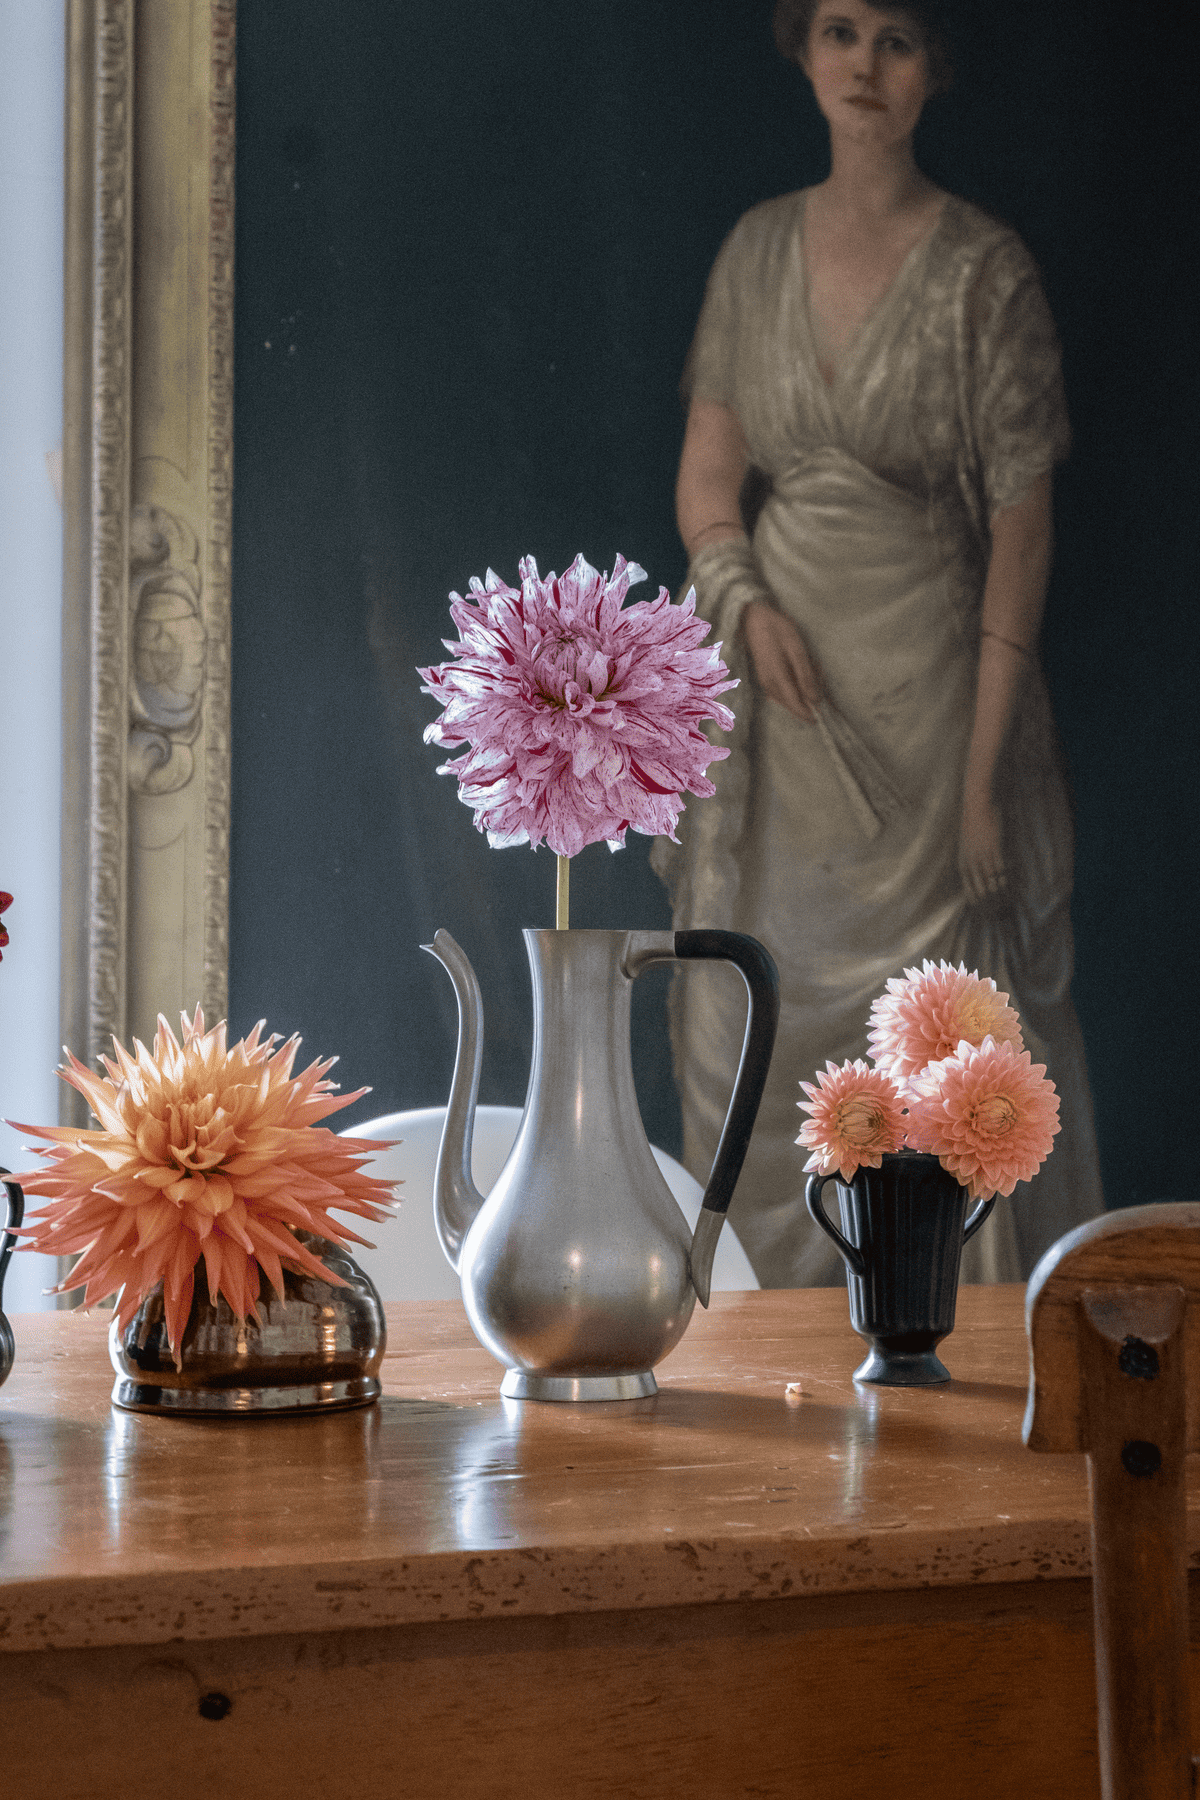 Alfred C, AC Paint and Hamilton Lillian dahlias in different vases in front of life sized portrait with gold frame.